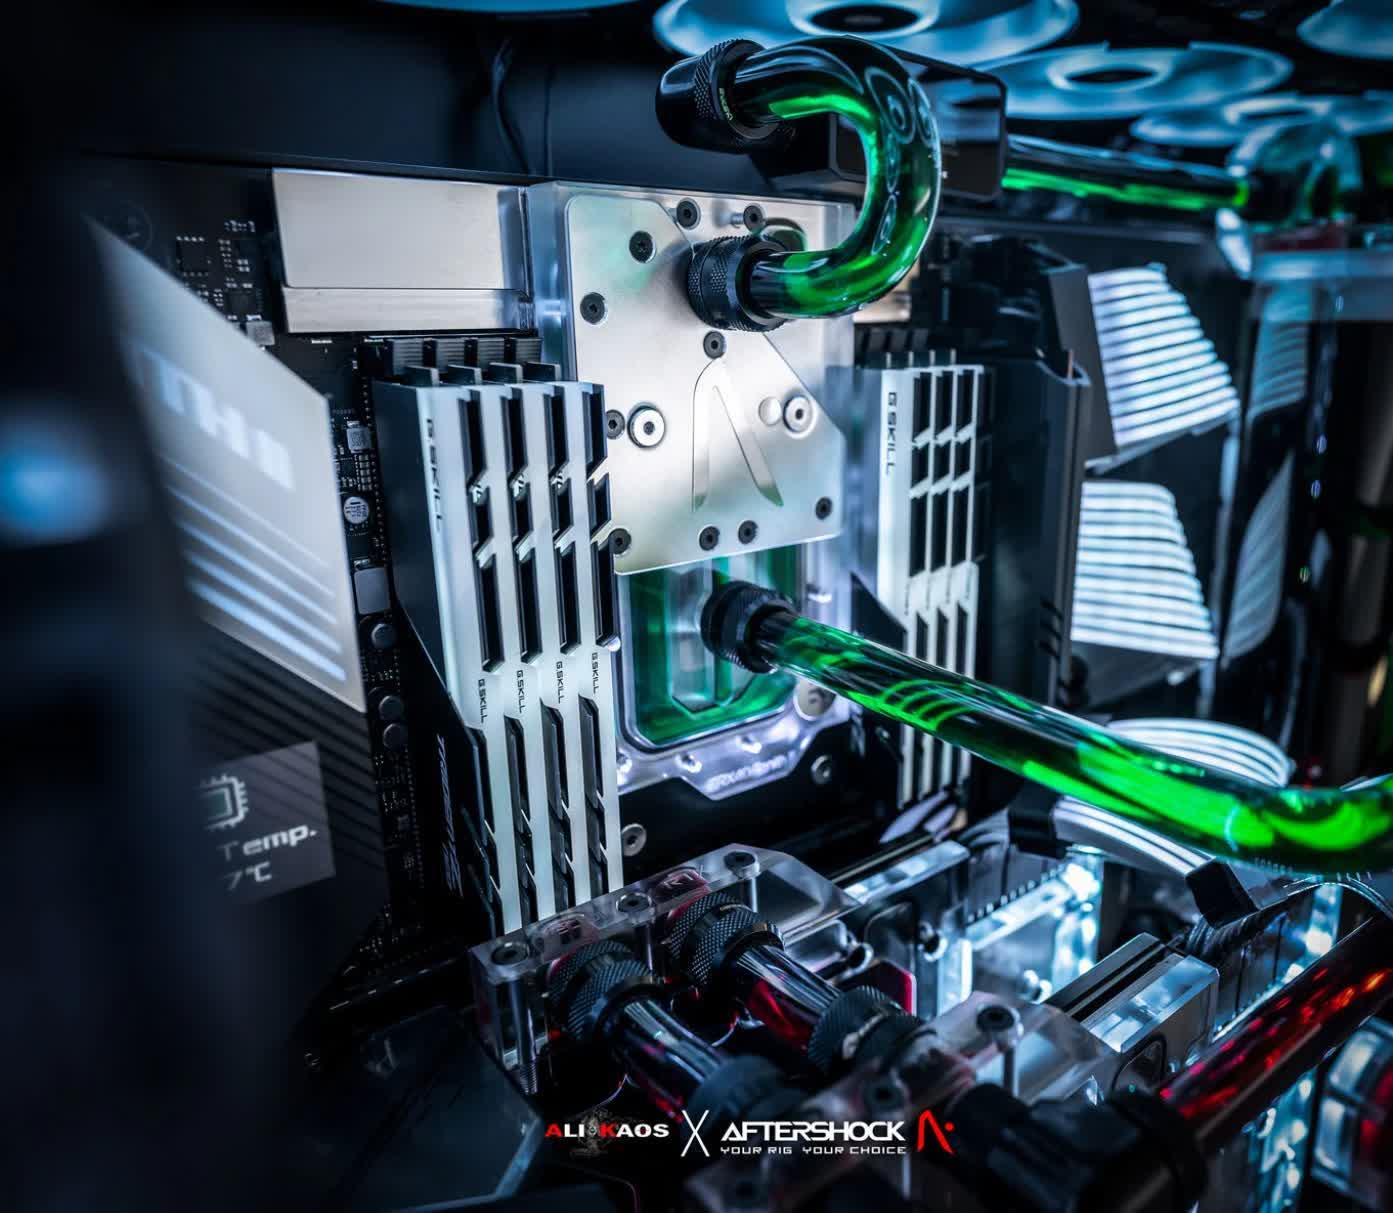 This $000 custom PC features two RTX 3090 cards, an AMD 3990X Threadripper, and 128GB RAM